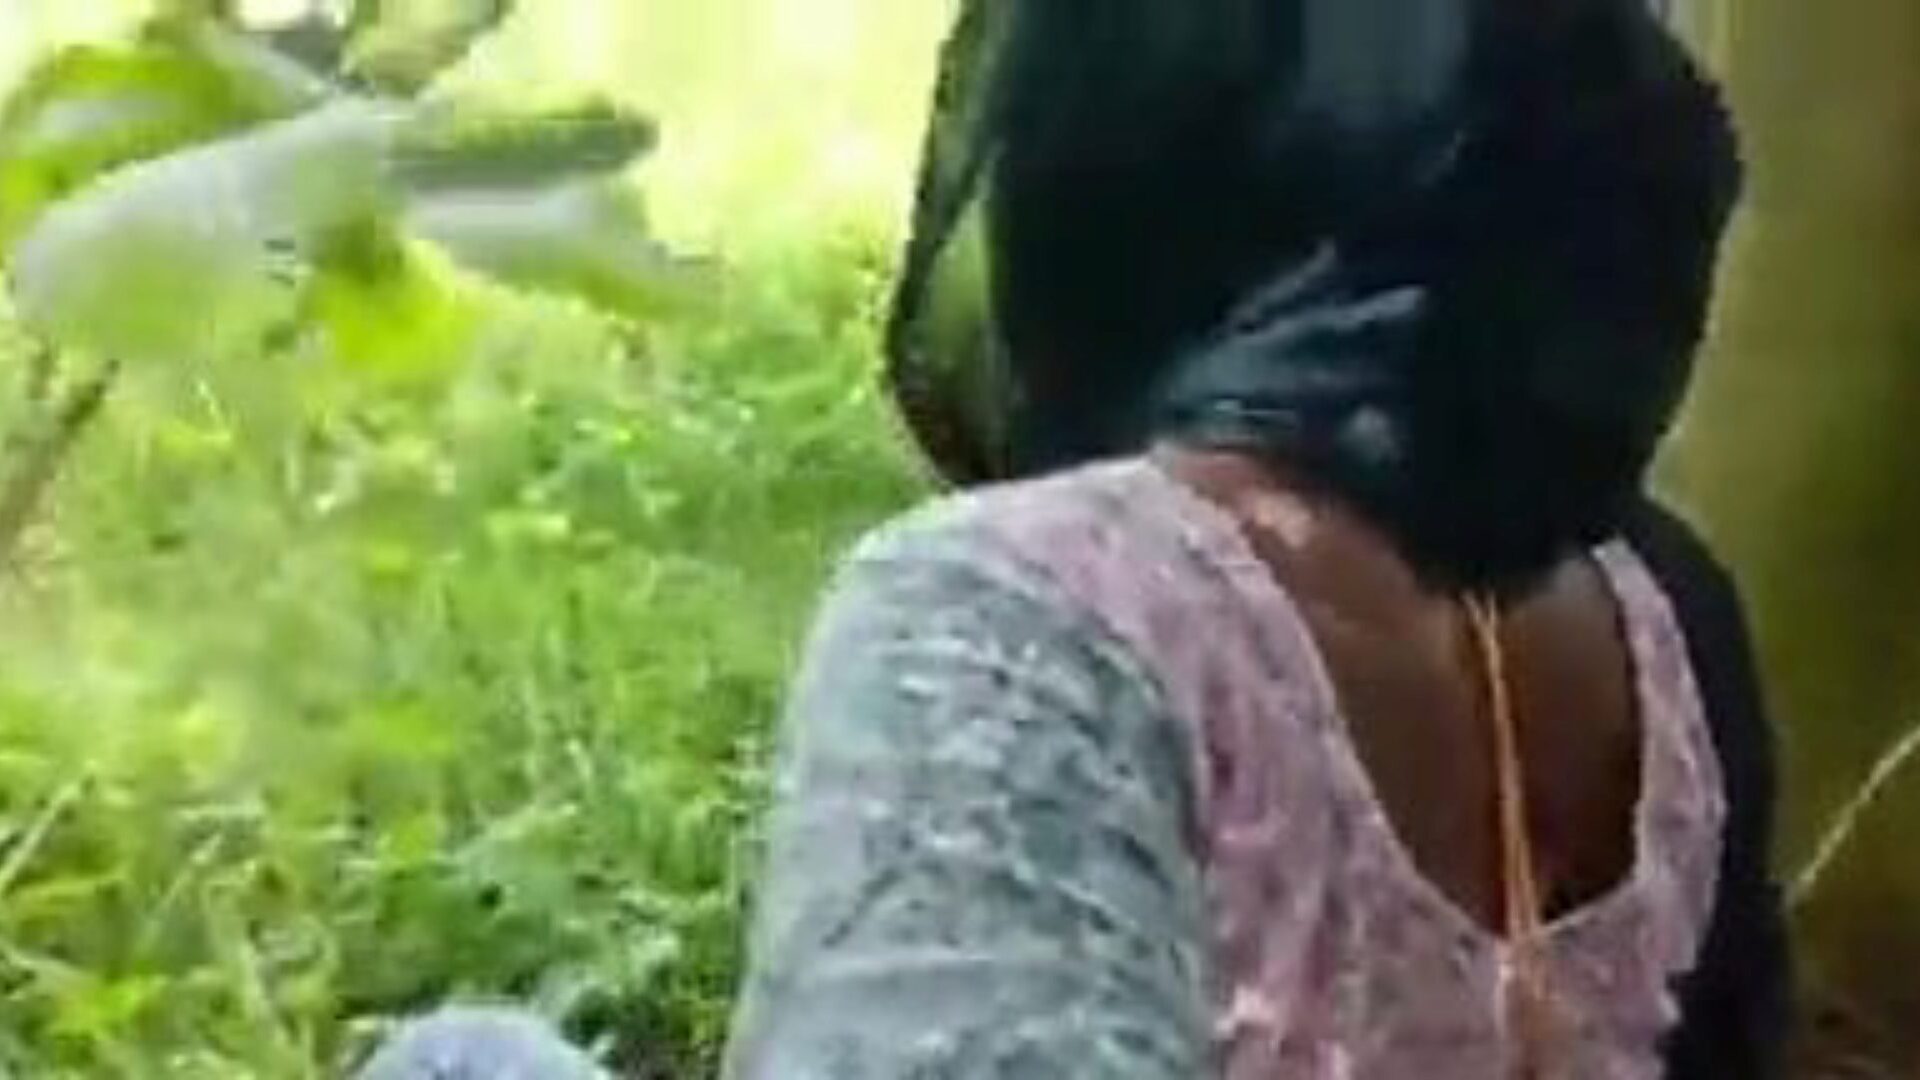 aunty fucked in forest outdoors, free porn 90: xhamster watch aunty fucked in forest outdoors video on xhamster, the fattest fucky-fucky tube web page with lots of free indian new aunty & homemade pornography clips